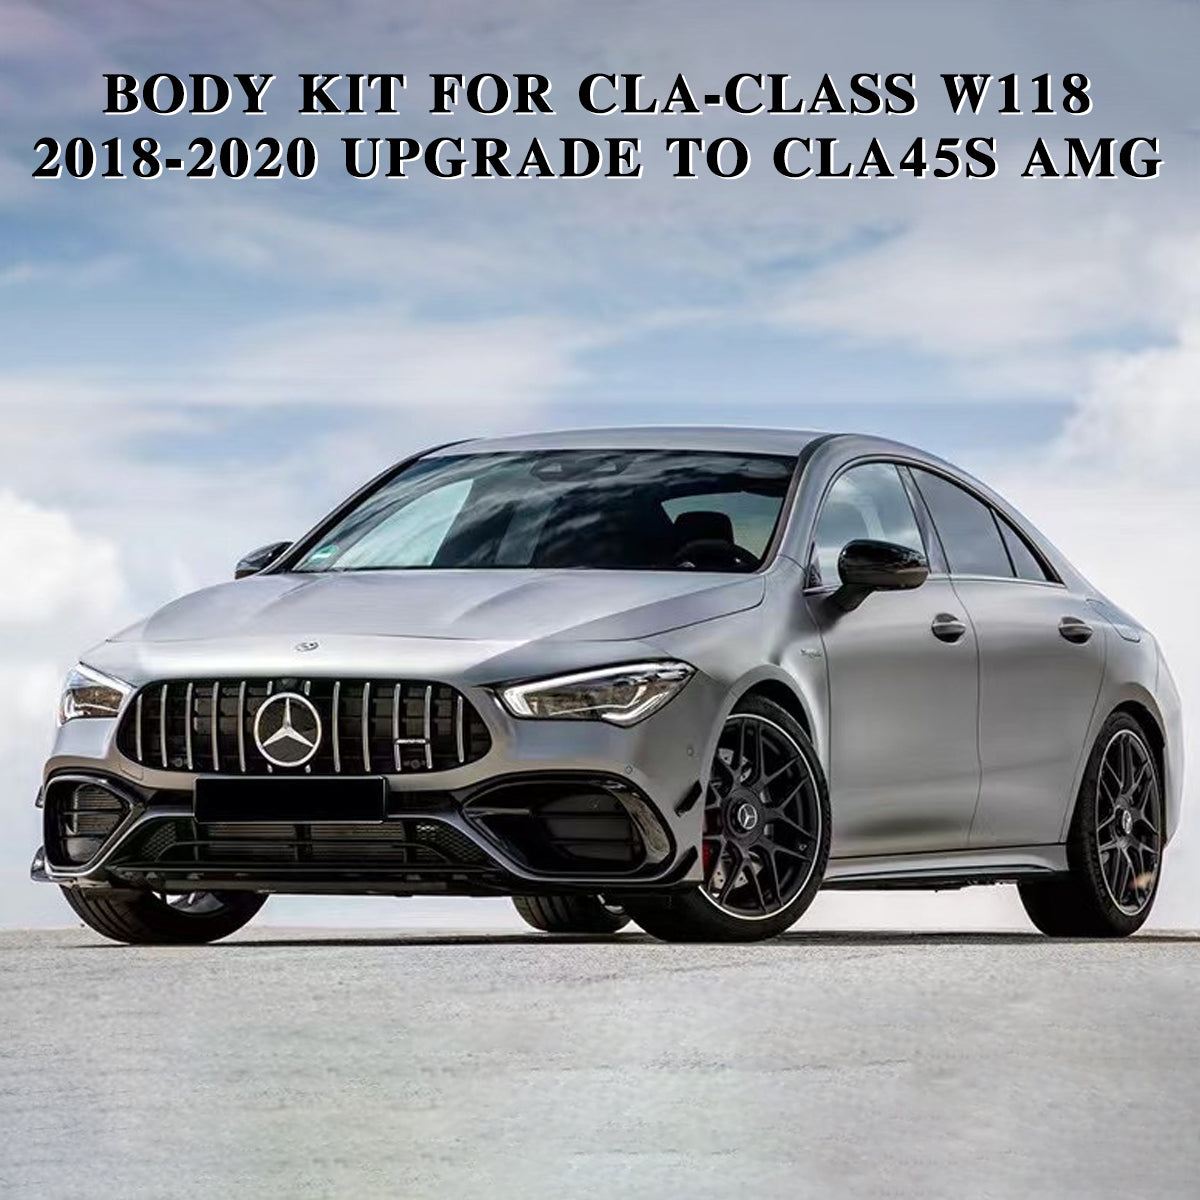 THE BODY KIT FOR W118 CLA 2018-2020 UPGRADE TO AMG